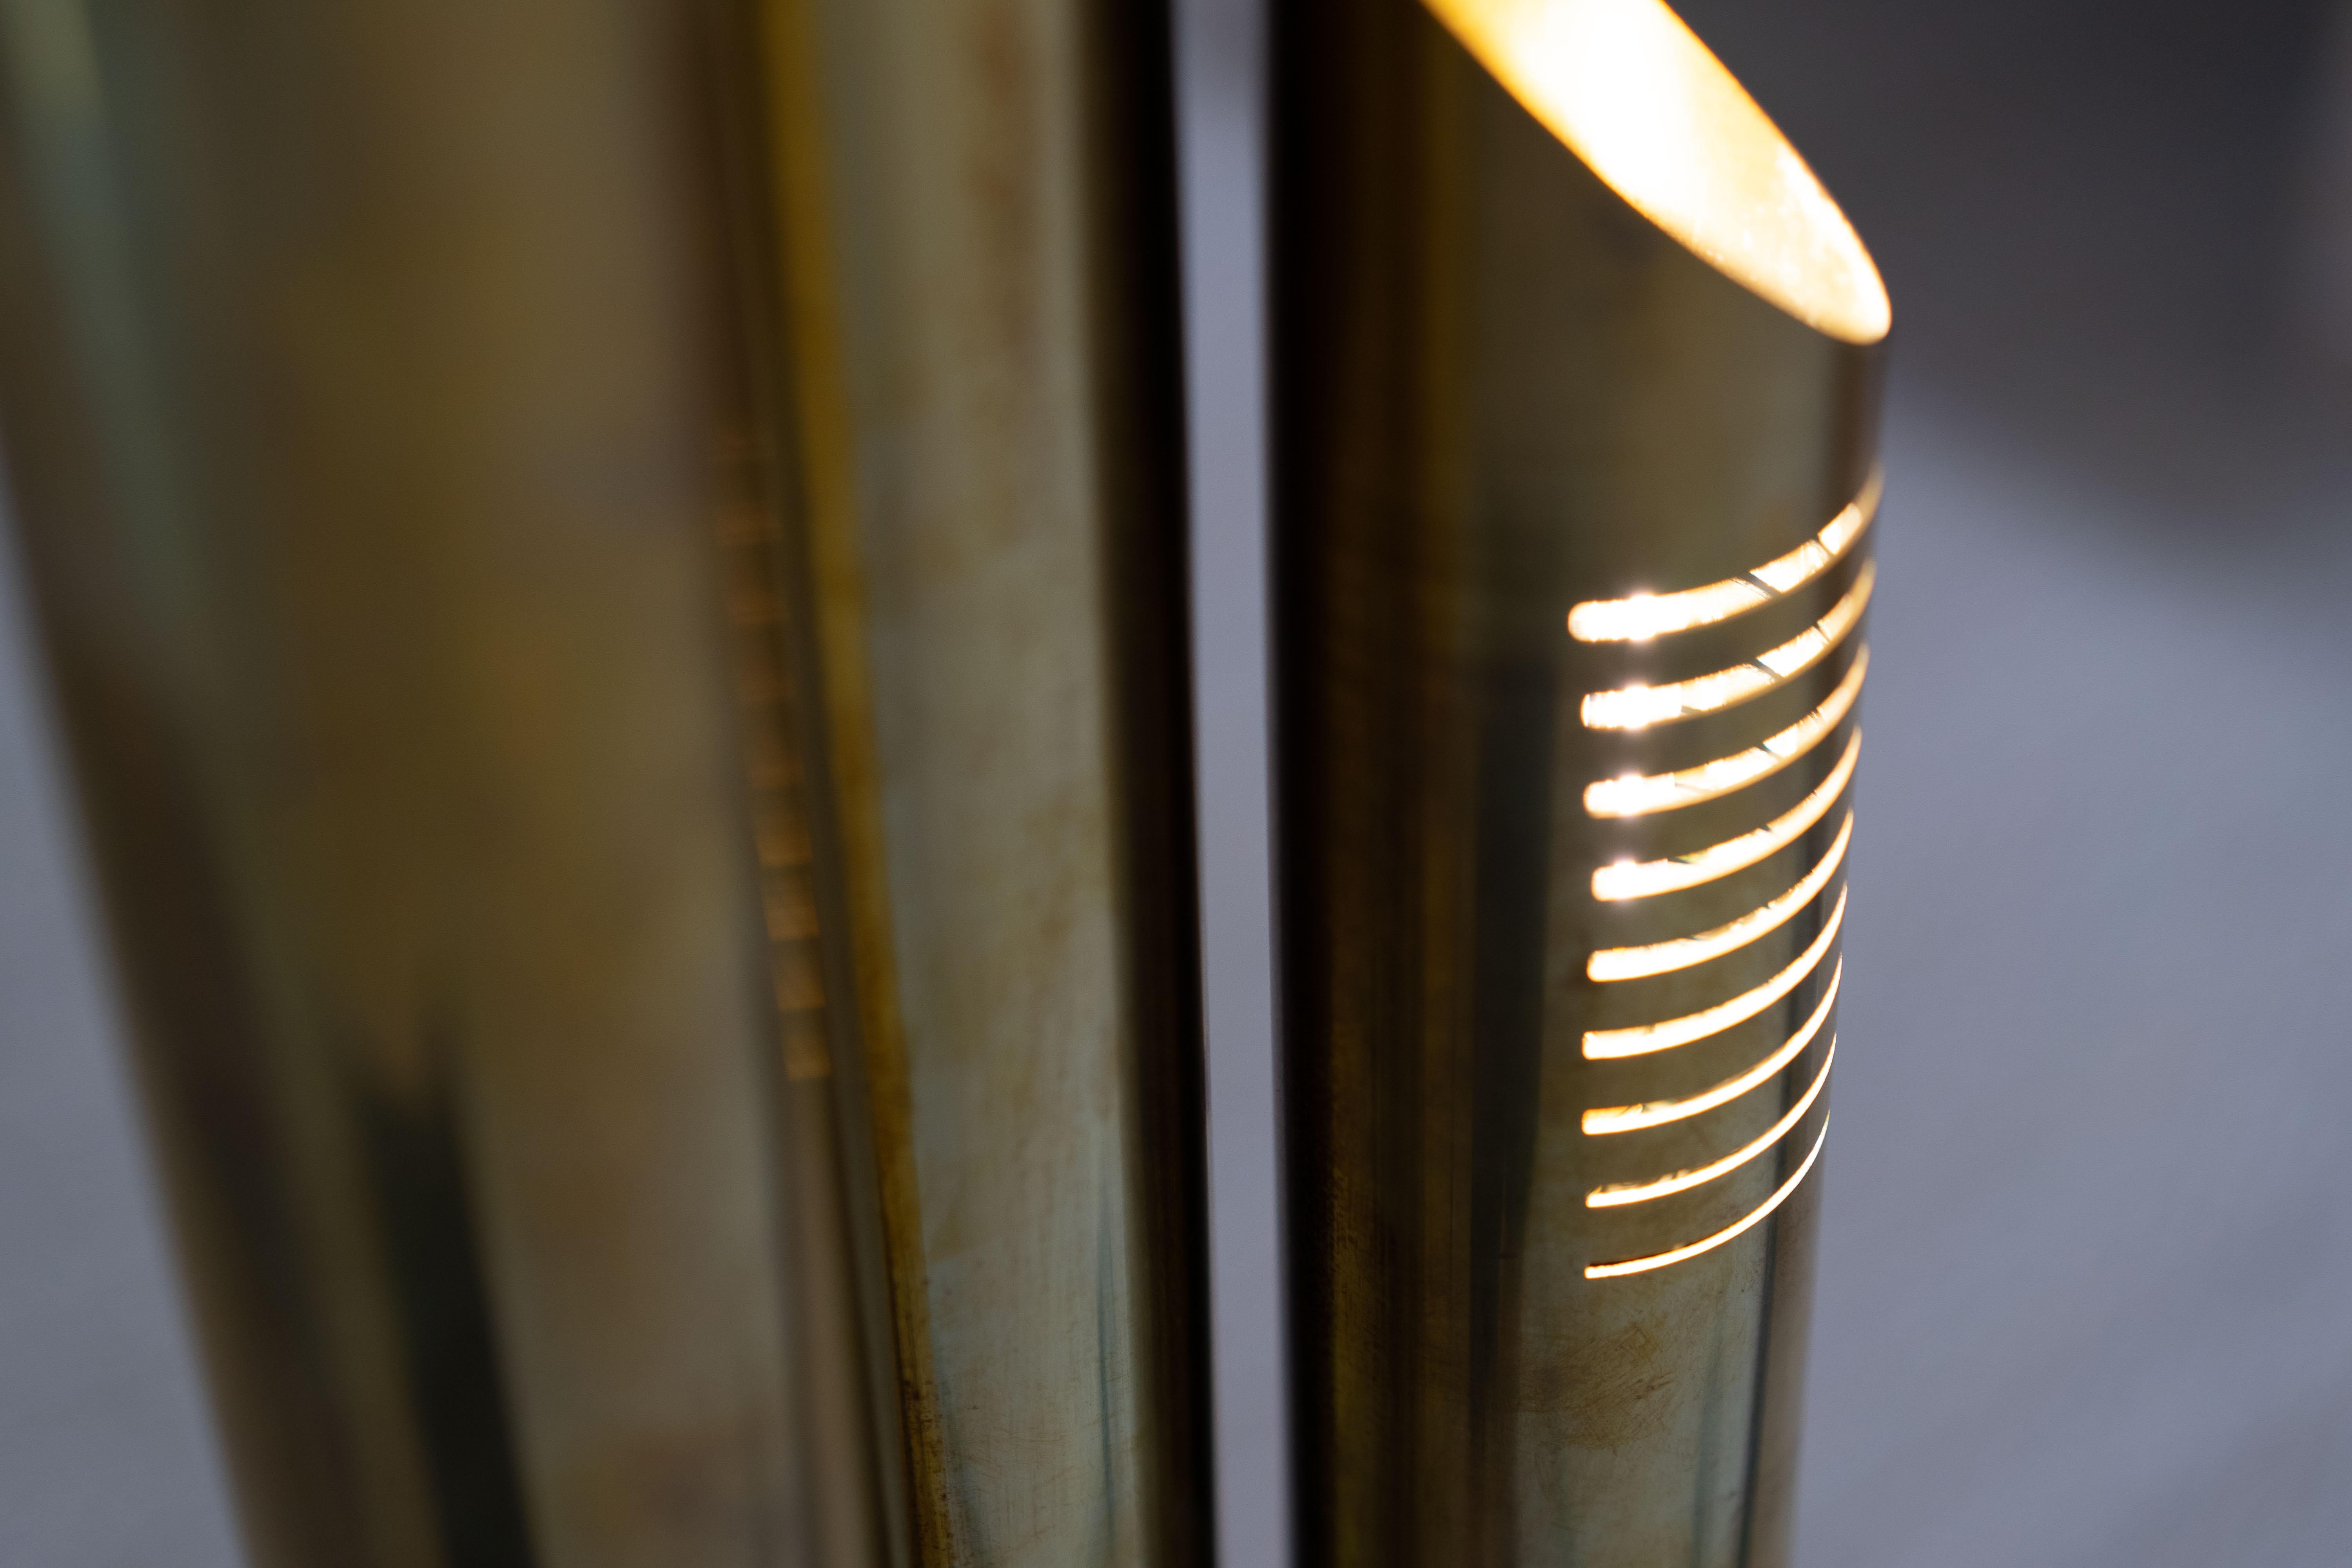 Late 20th Century Italian Solid Brass Tube Floor Lamp Designed by R. Fontana, circa 1970 For Sale